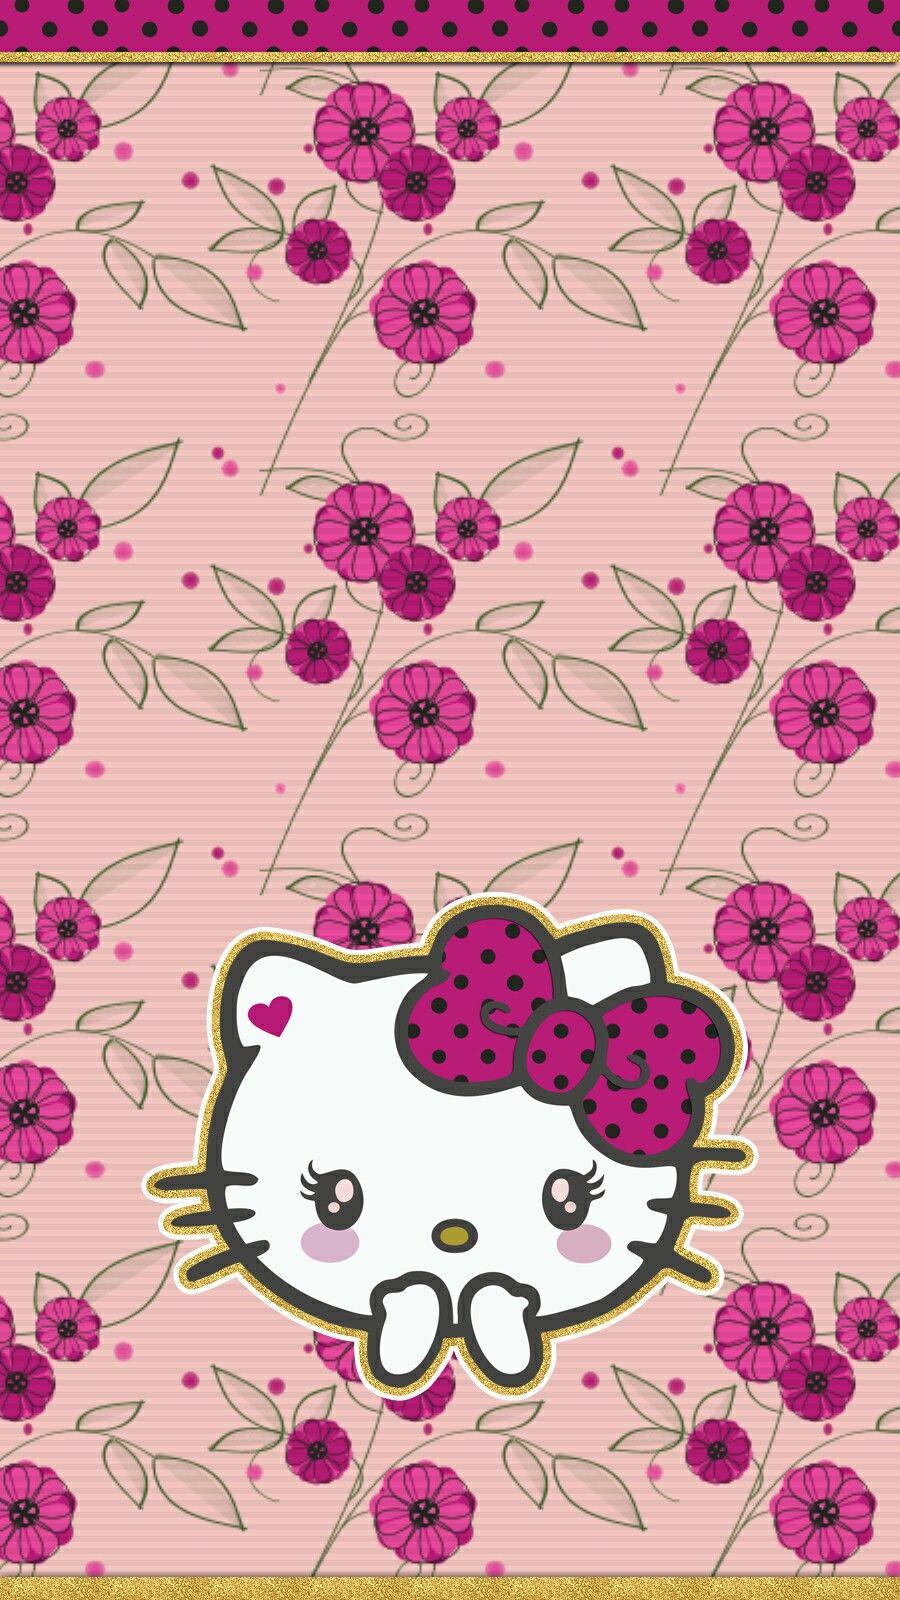 iPhone Wall: HK tjn. phone & facebook papers. Floral